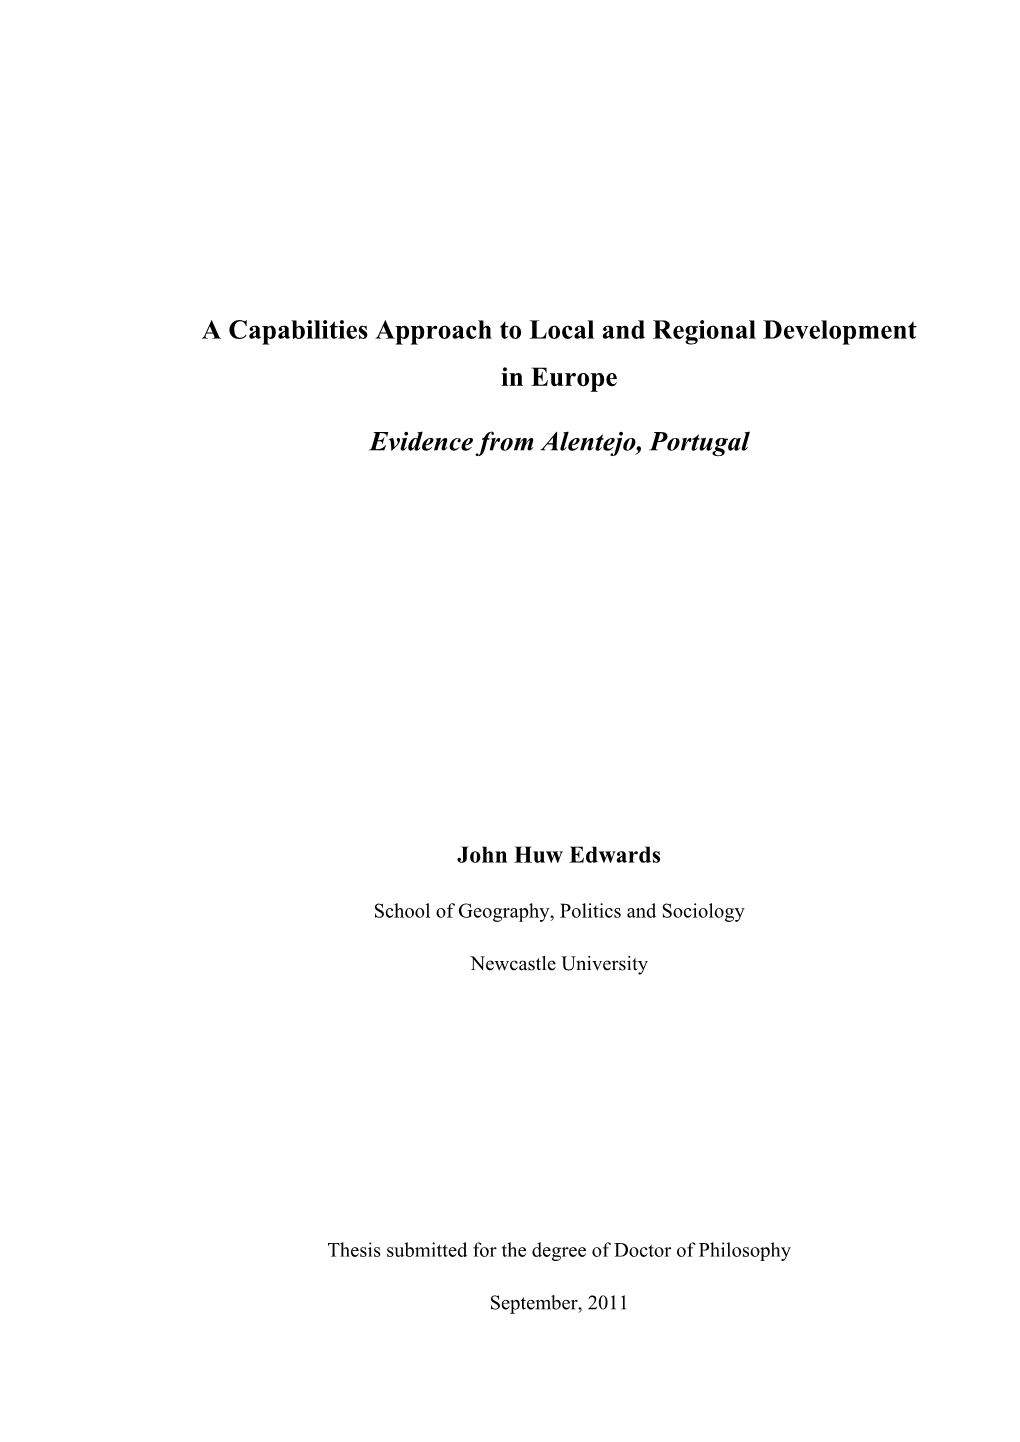 A Capabilities Approach to Local and Regional Development in Europe